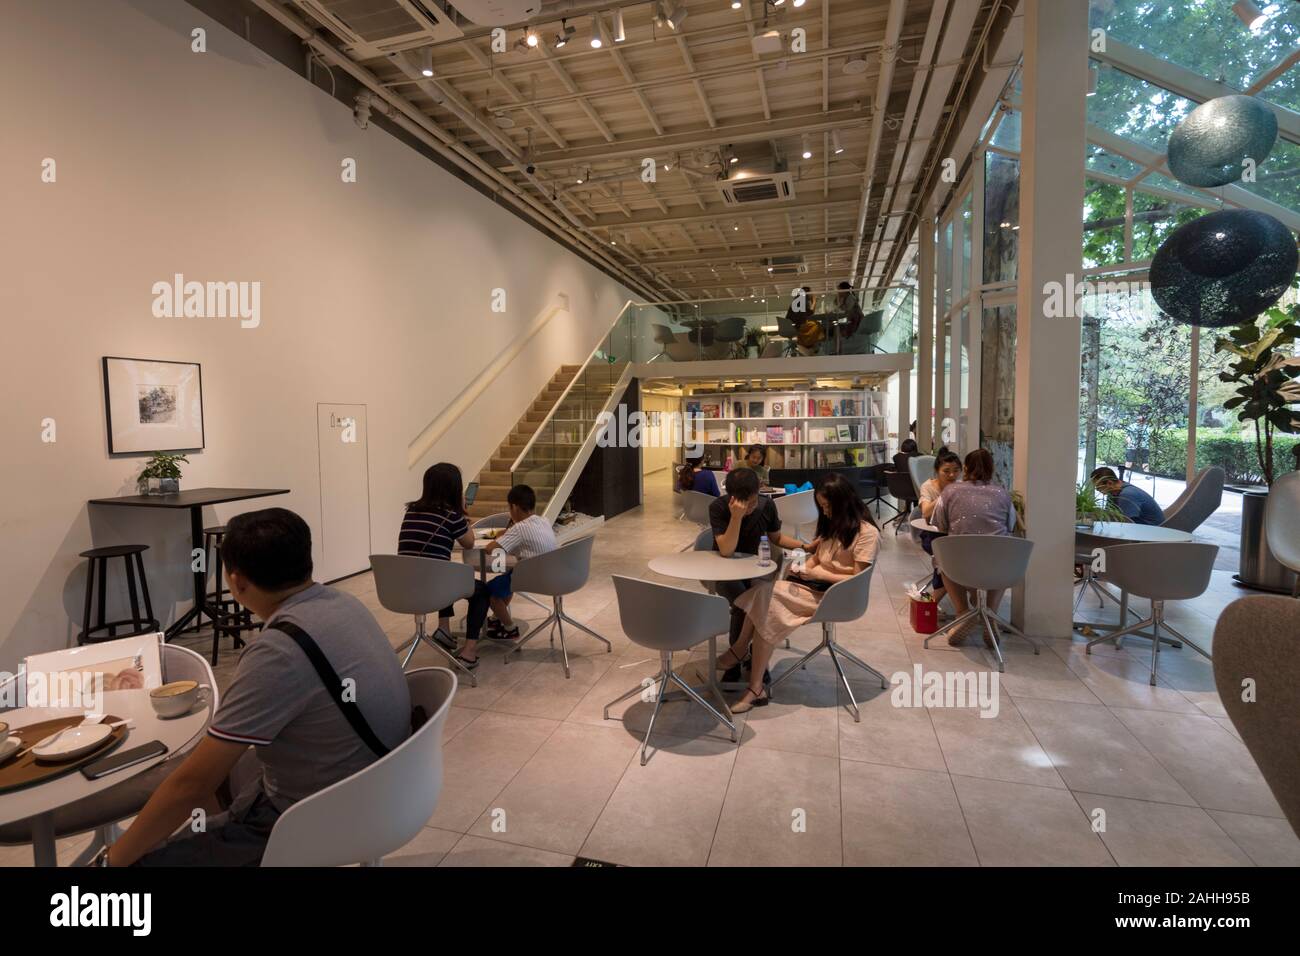 cafe, The National Art Museum of China, Beijing, China Stock Photo